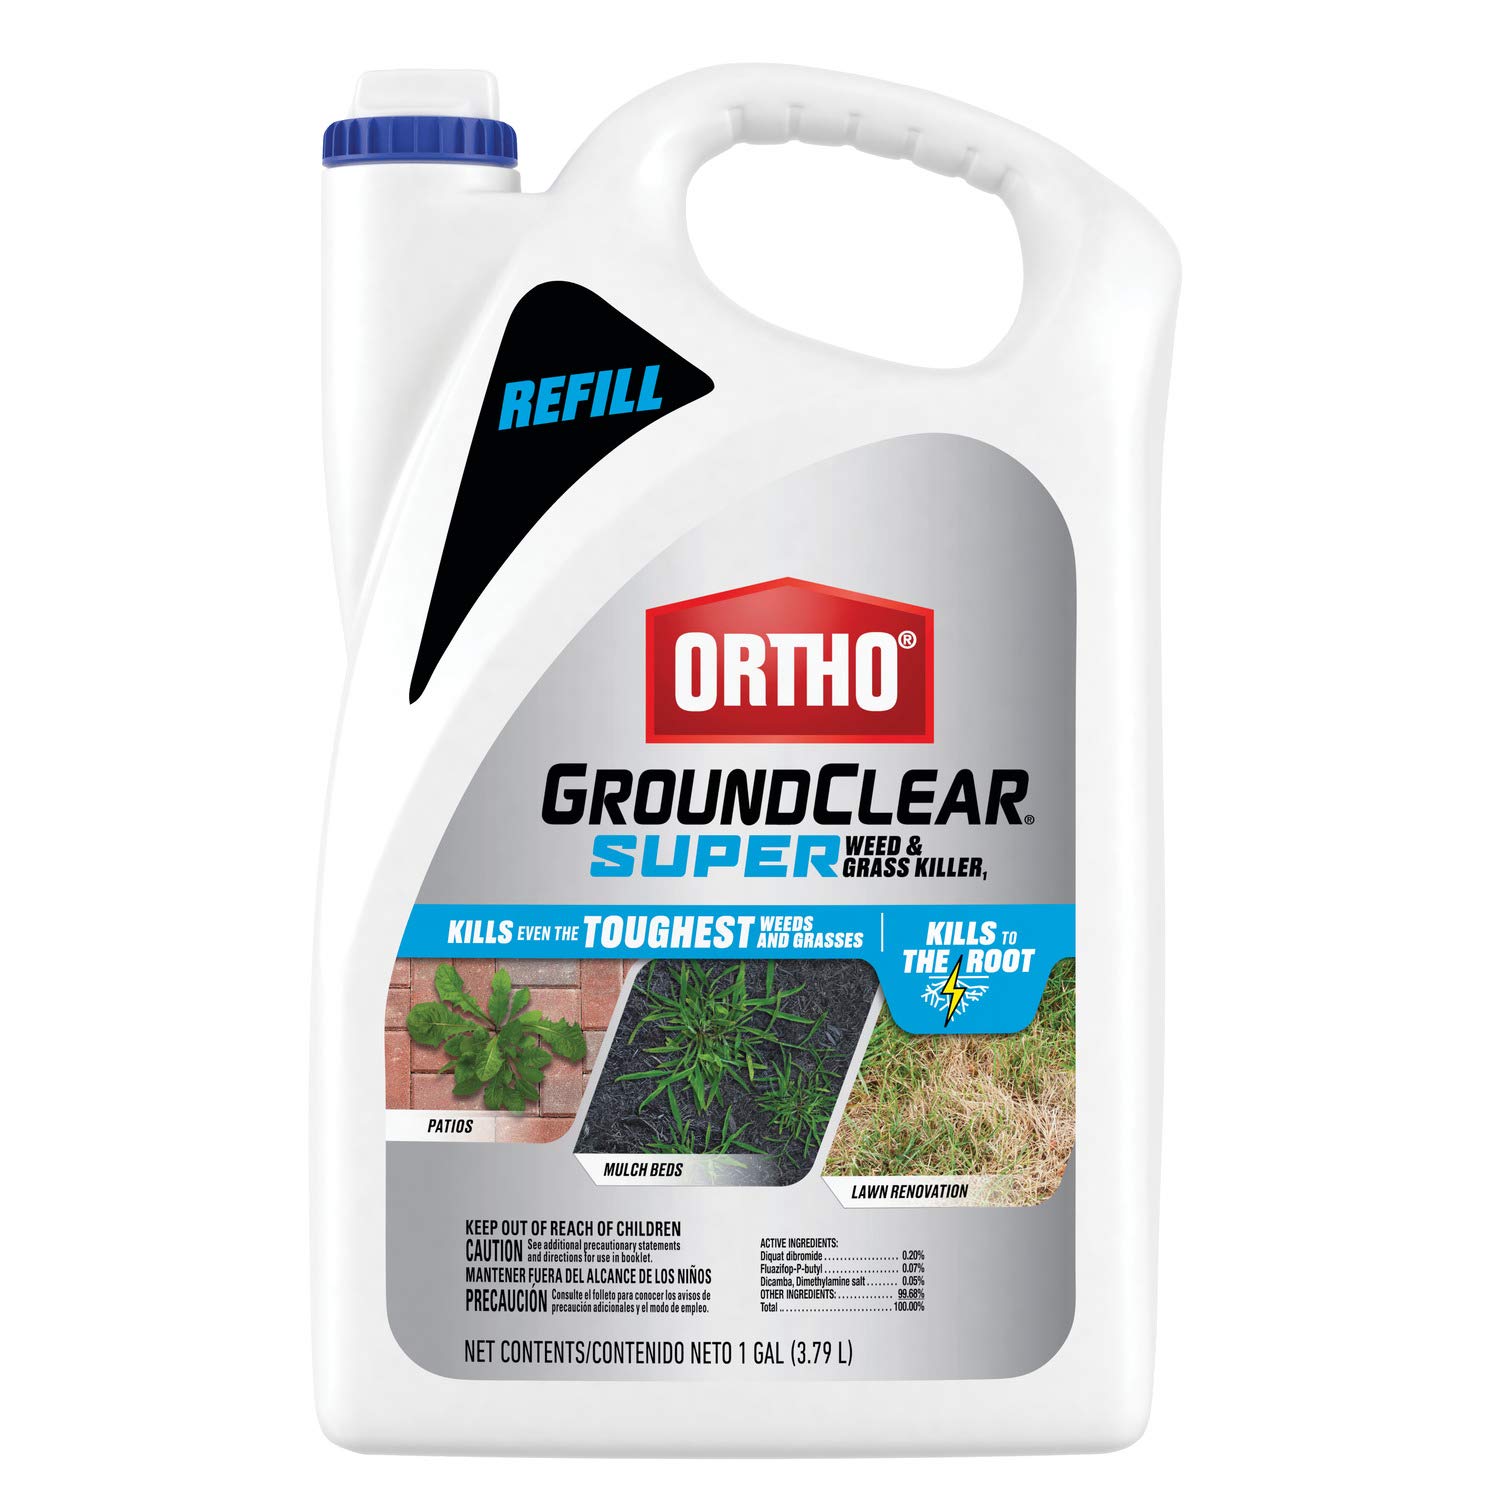 1-Gal Ortho GroundClear Super Weed & Grass Killer Refill $9 + Free Shipping w/ Prime or on orders $35+